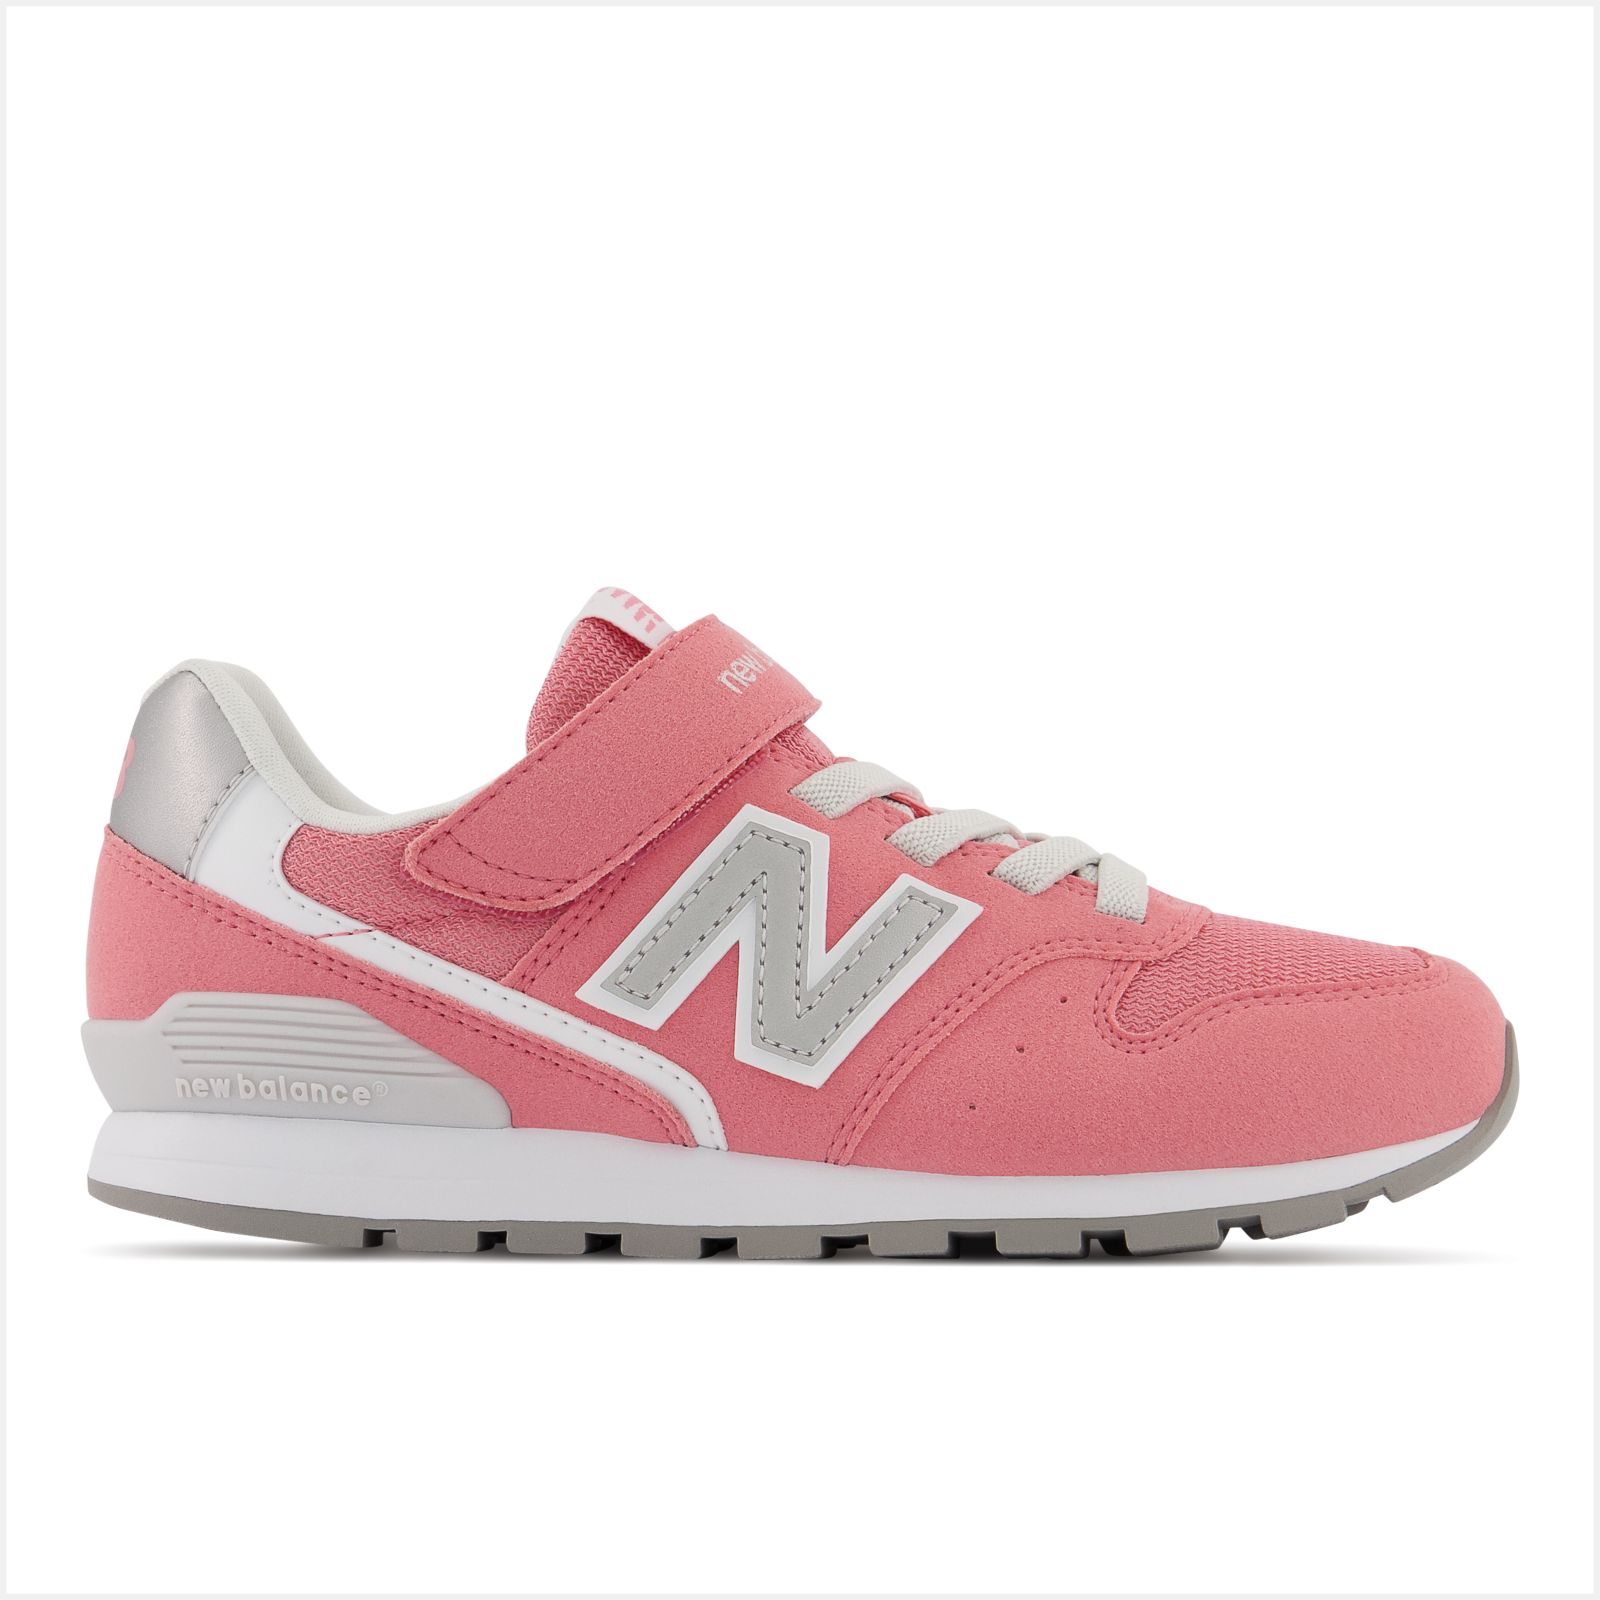 Scheiding vaccinatie Zonsverduistering Kids' 996 Bungee Lace with Top Strap Shoes - New Balance